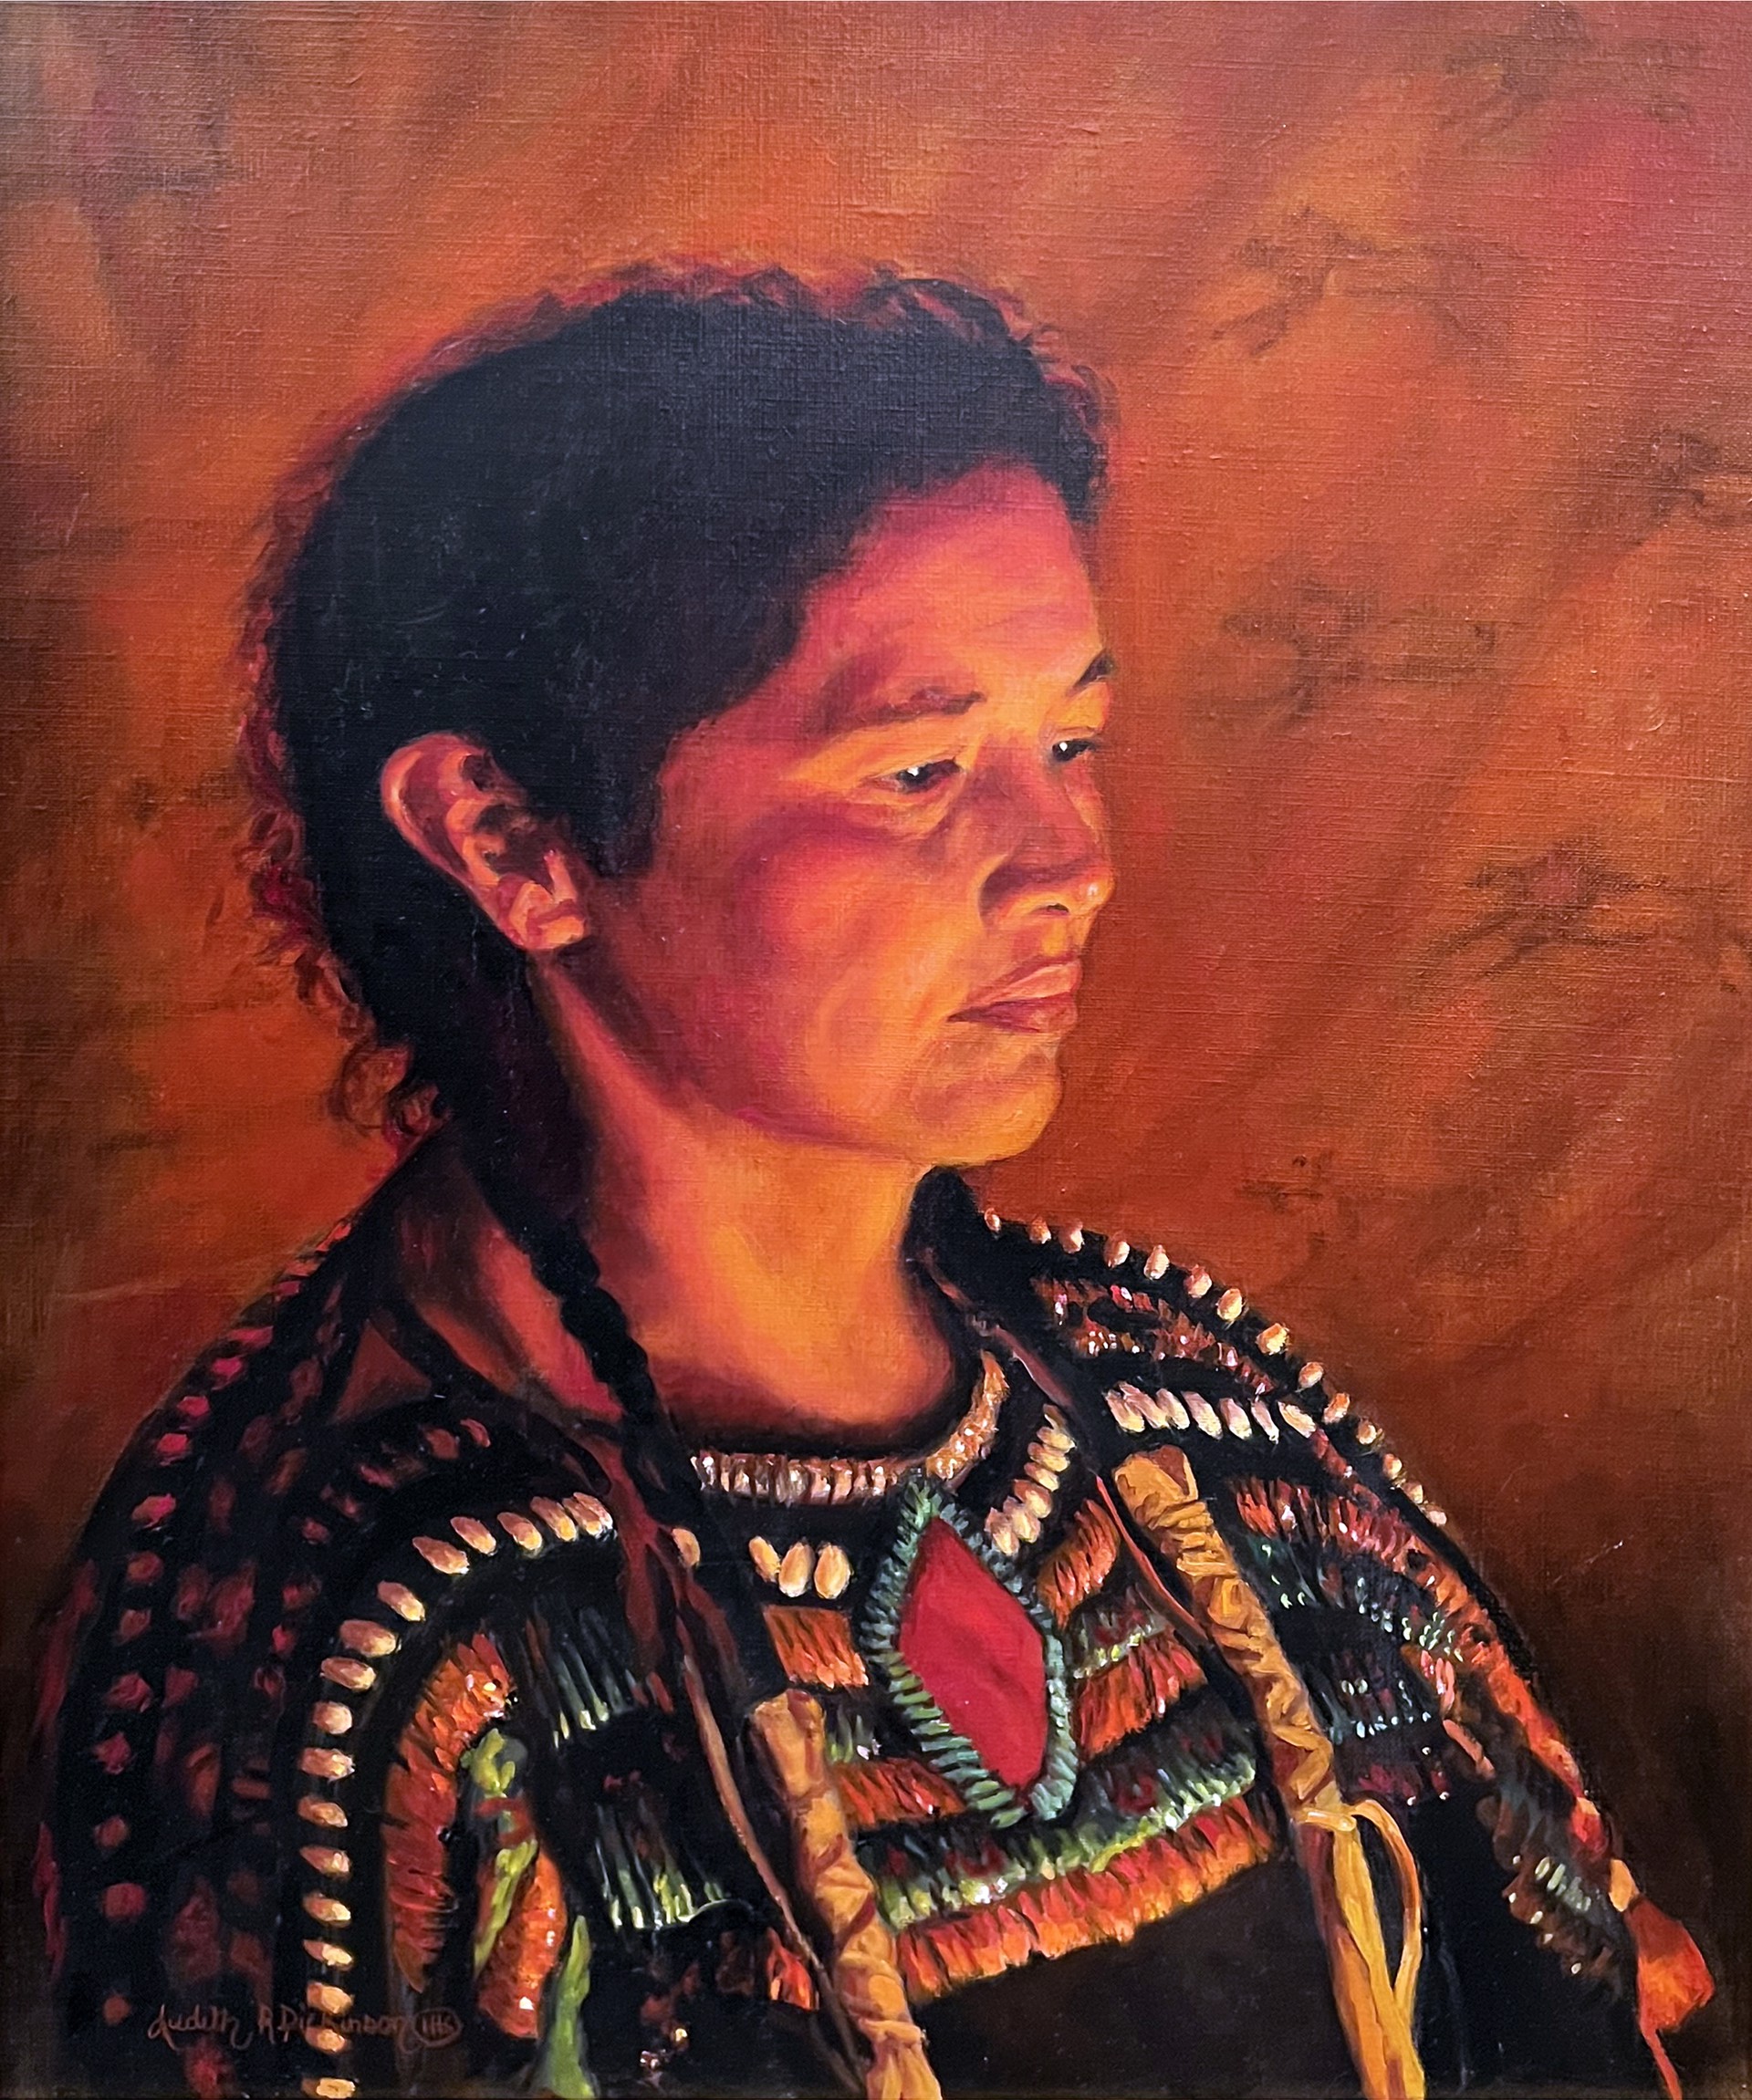 Indian Lady with Candlelight by Judith Dickinson